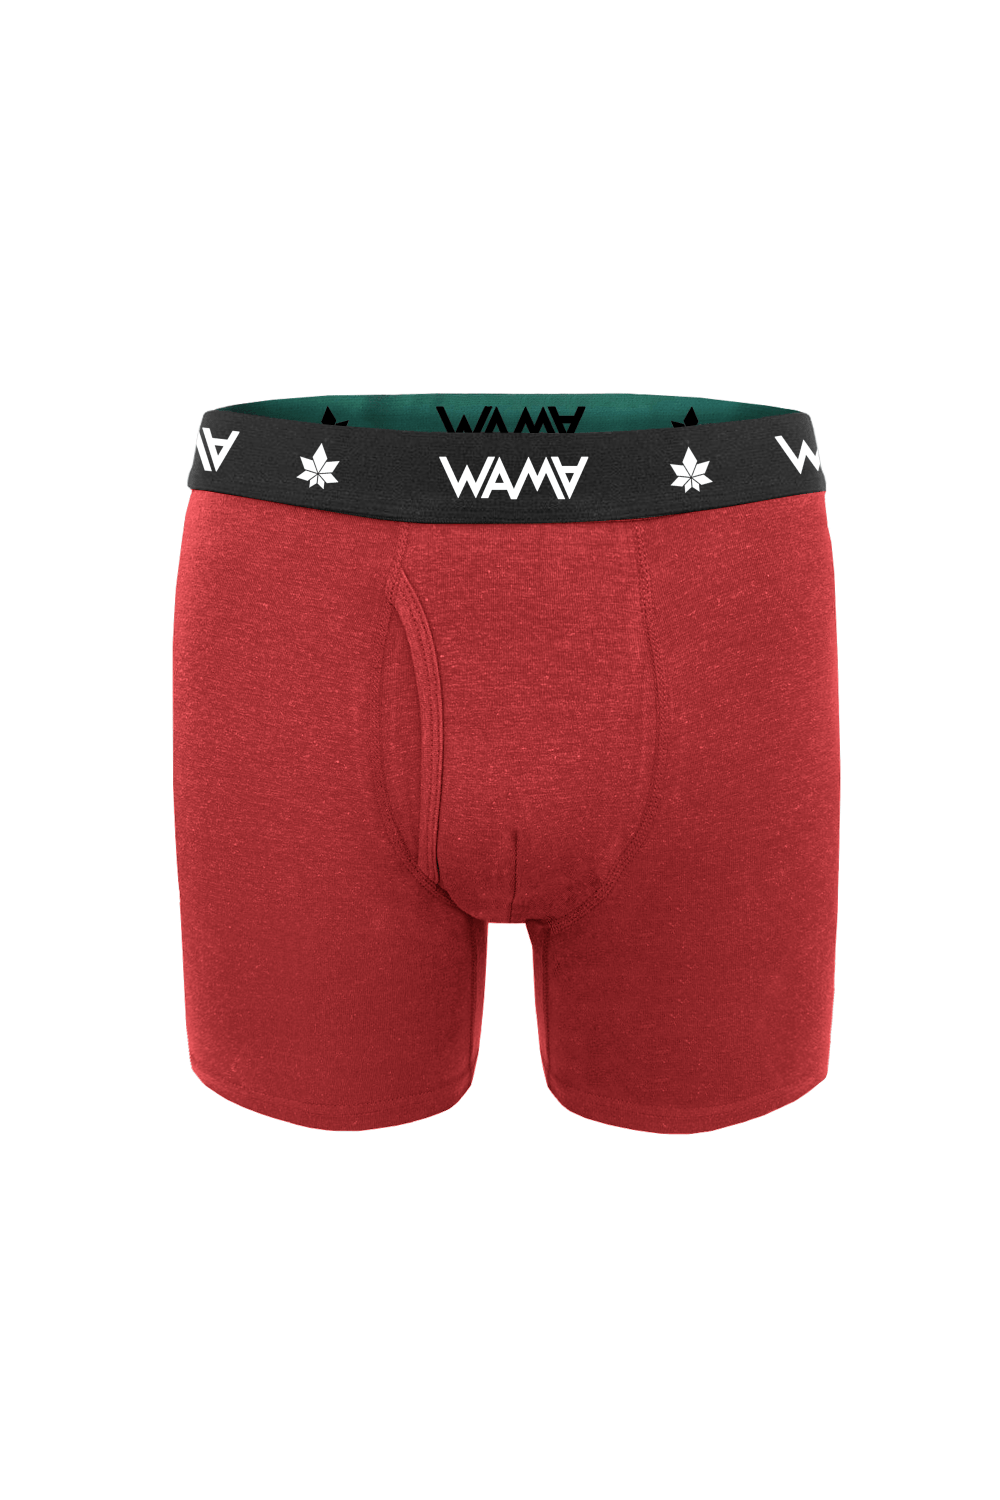 WAMA Hemp Underwear Are Some Of The Most Comfortable Boxer Shorts